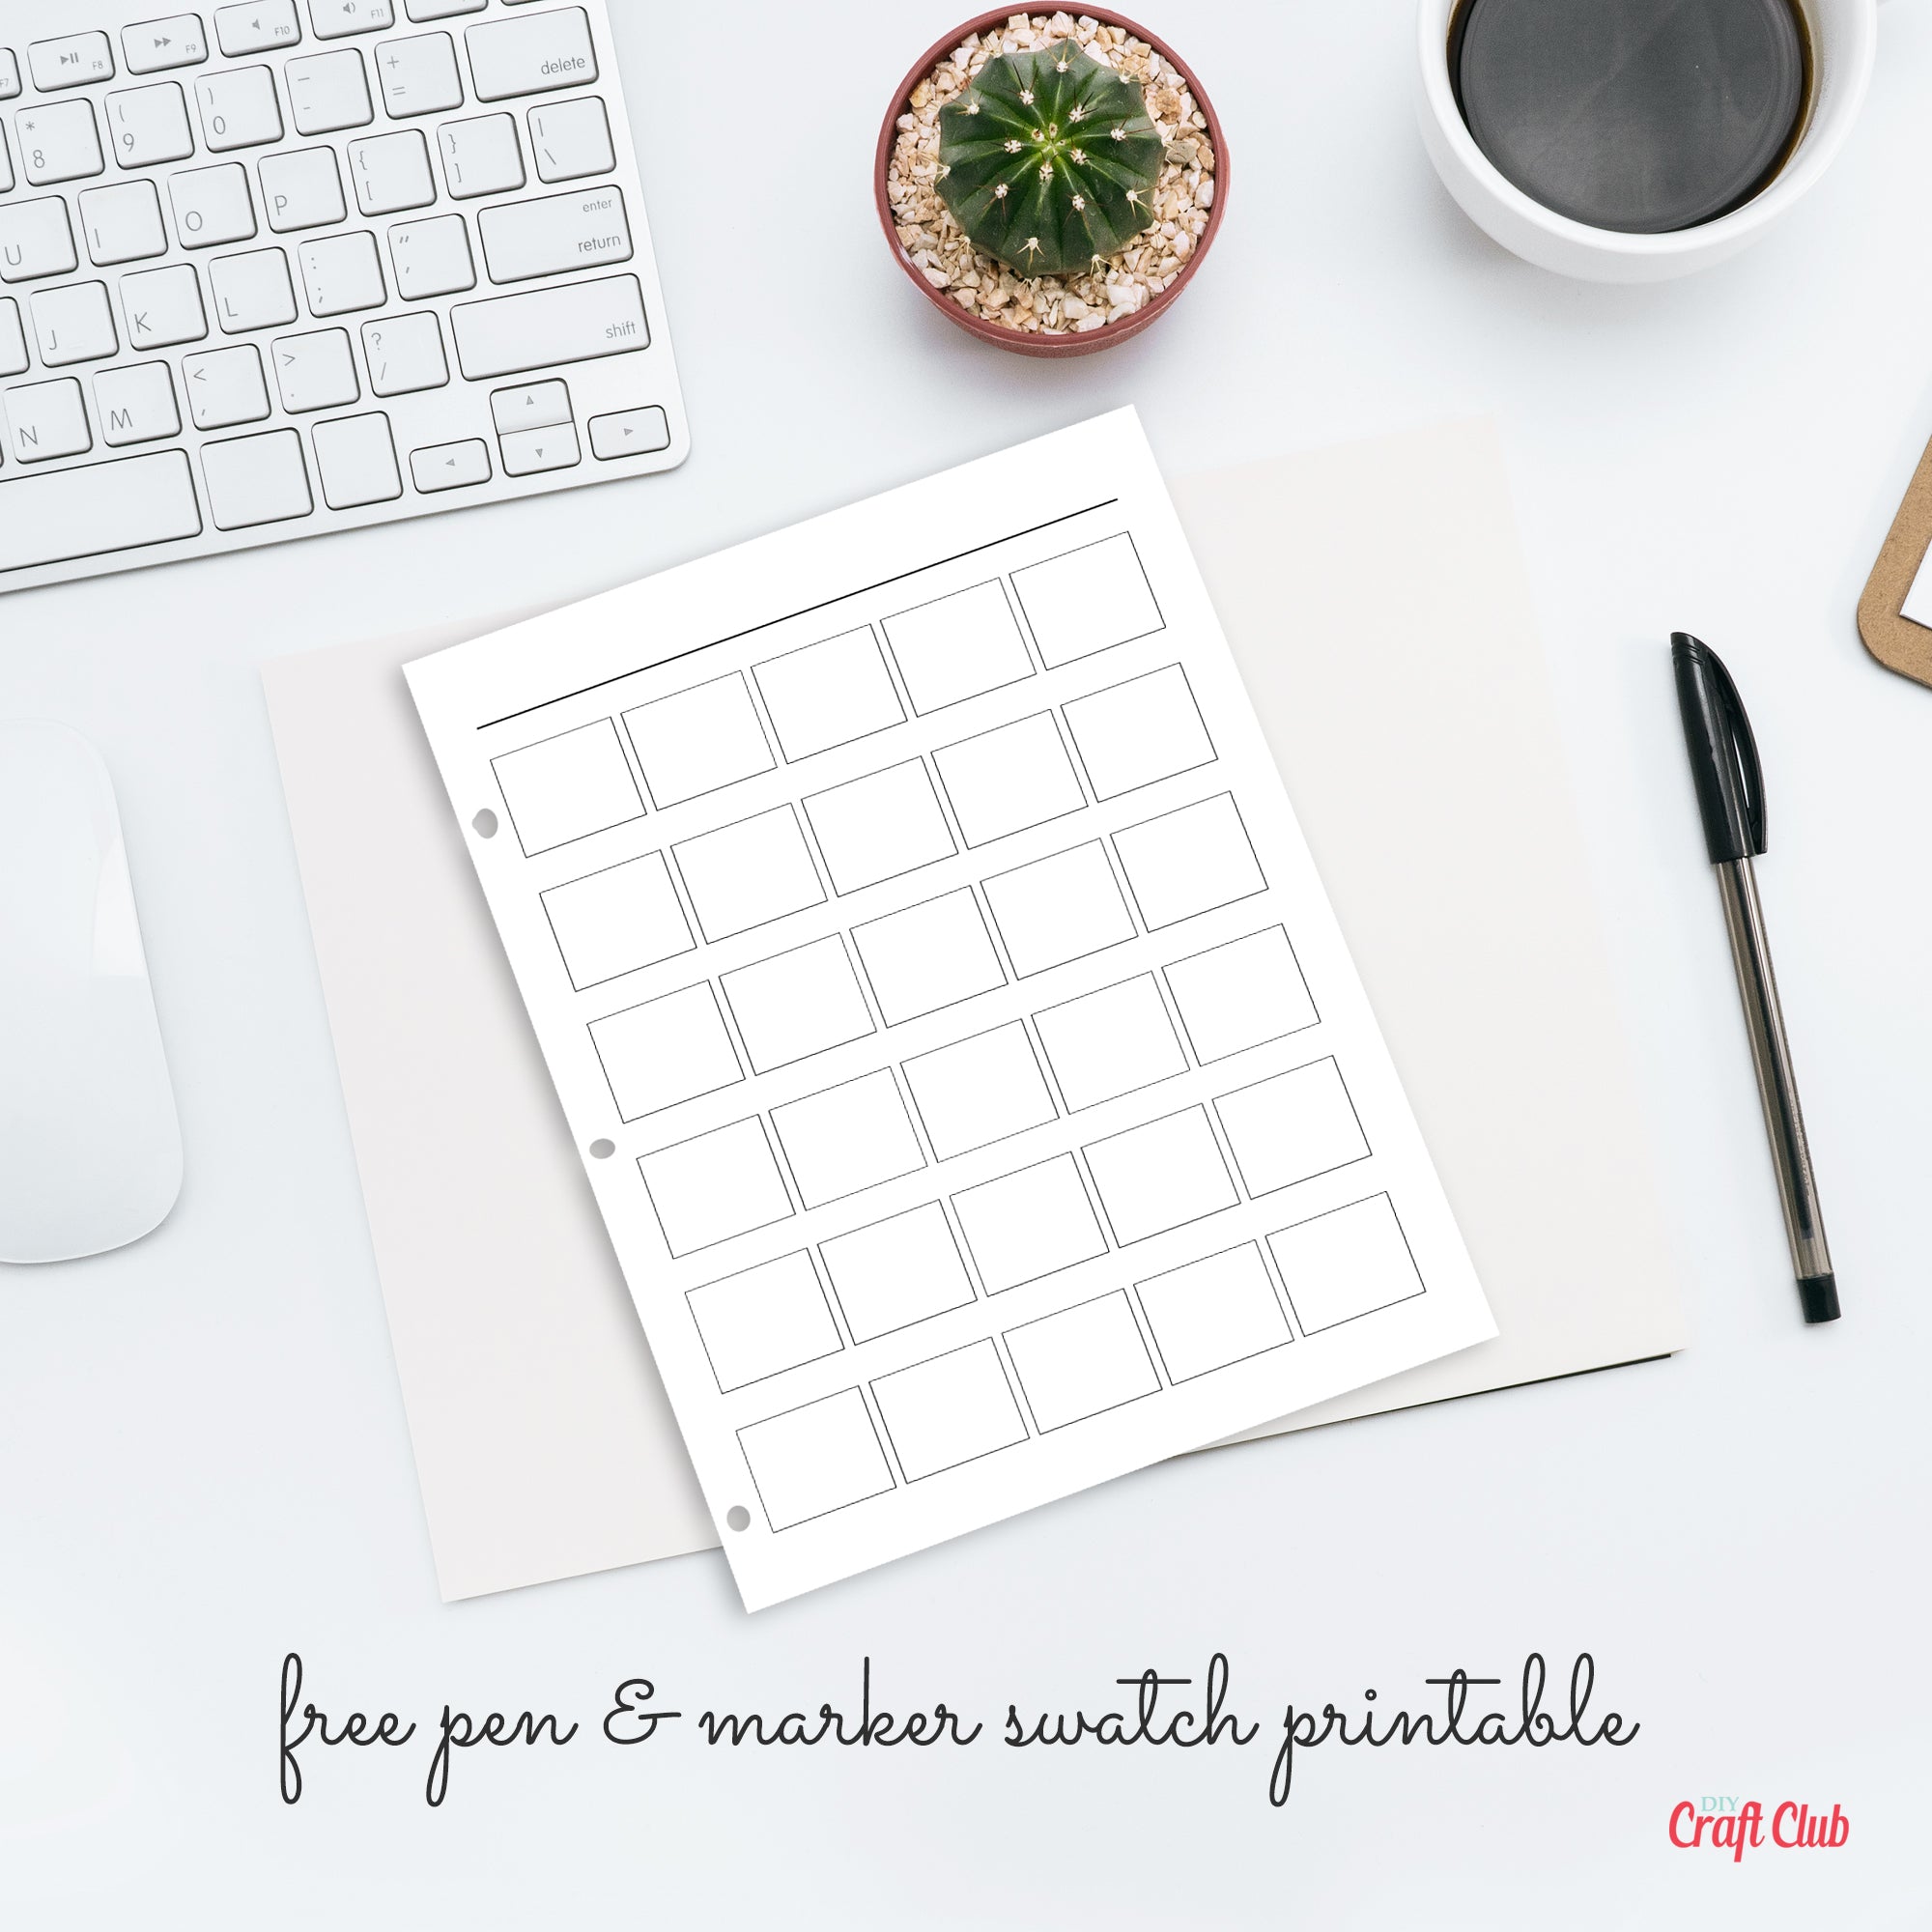 printable-marker-swatch-template